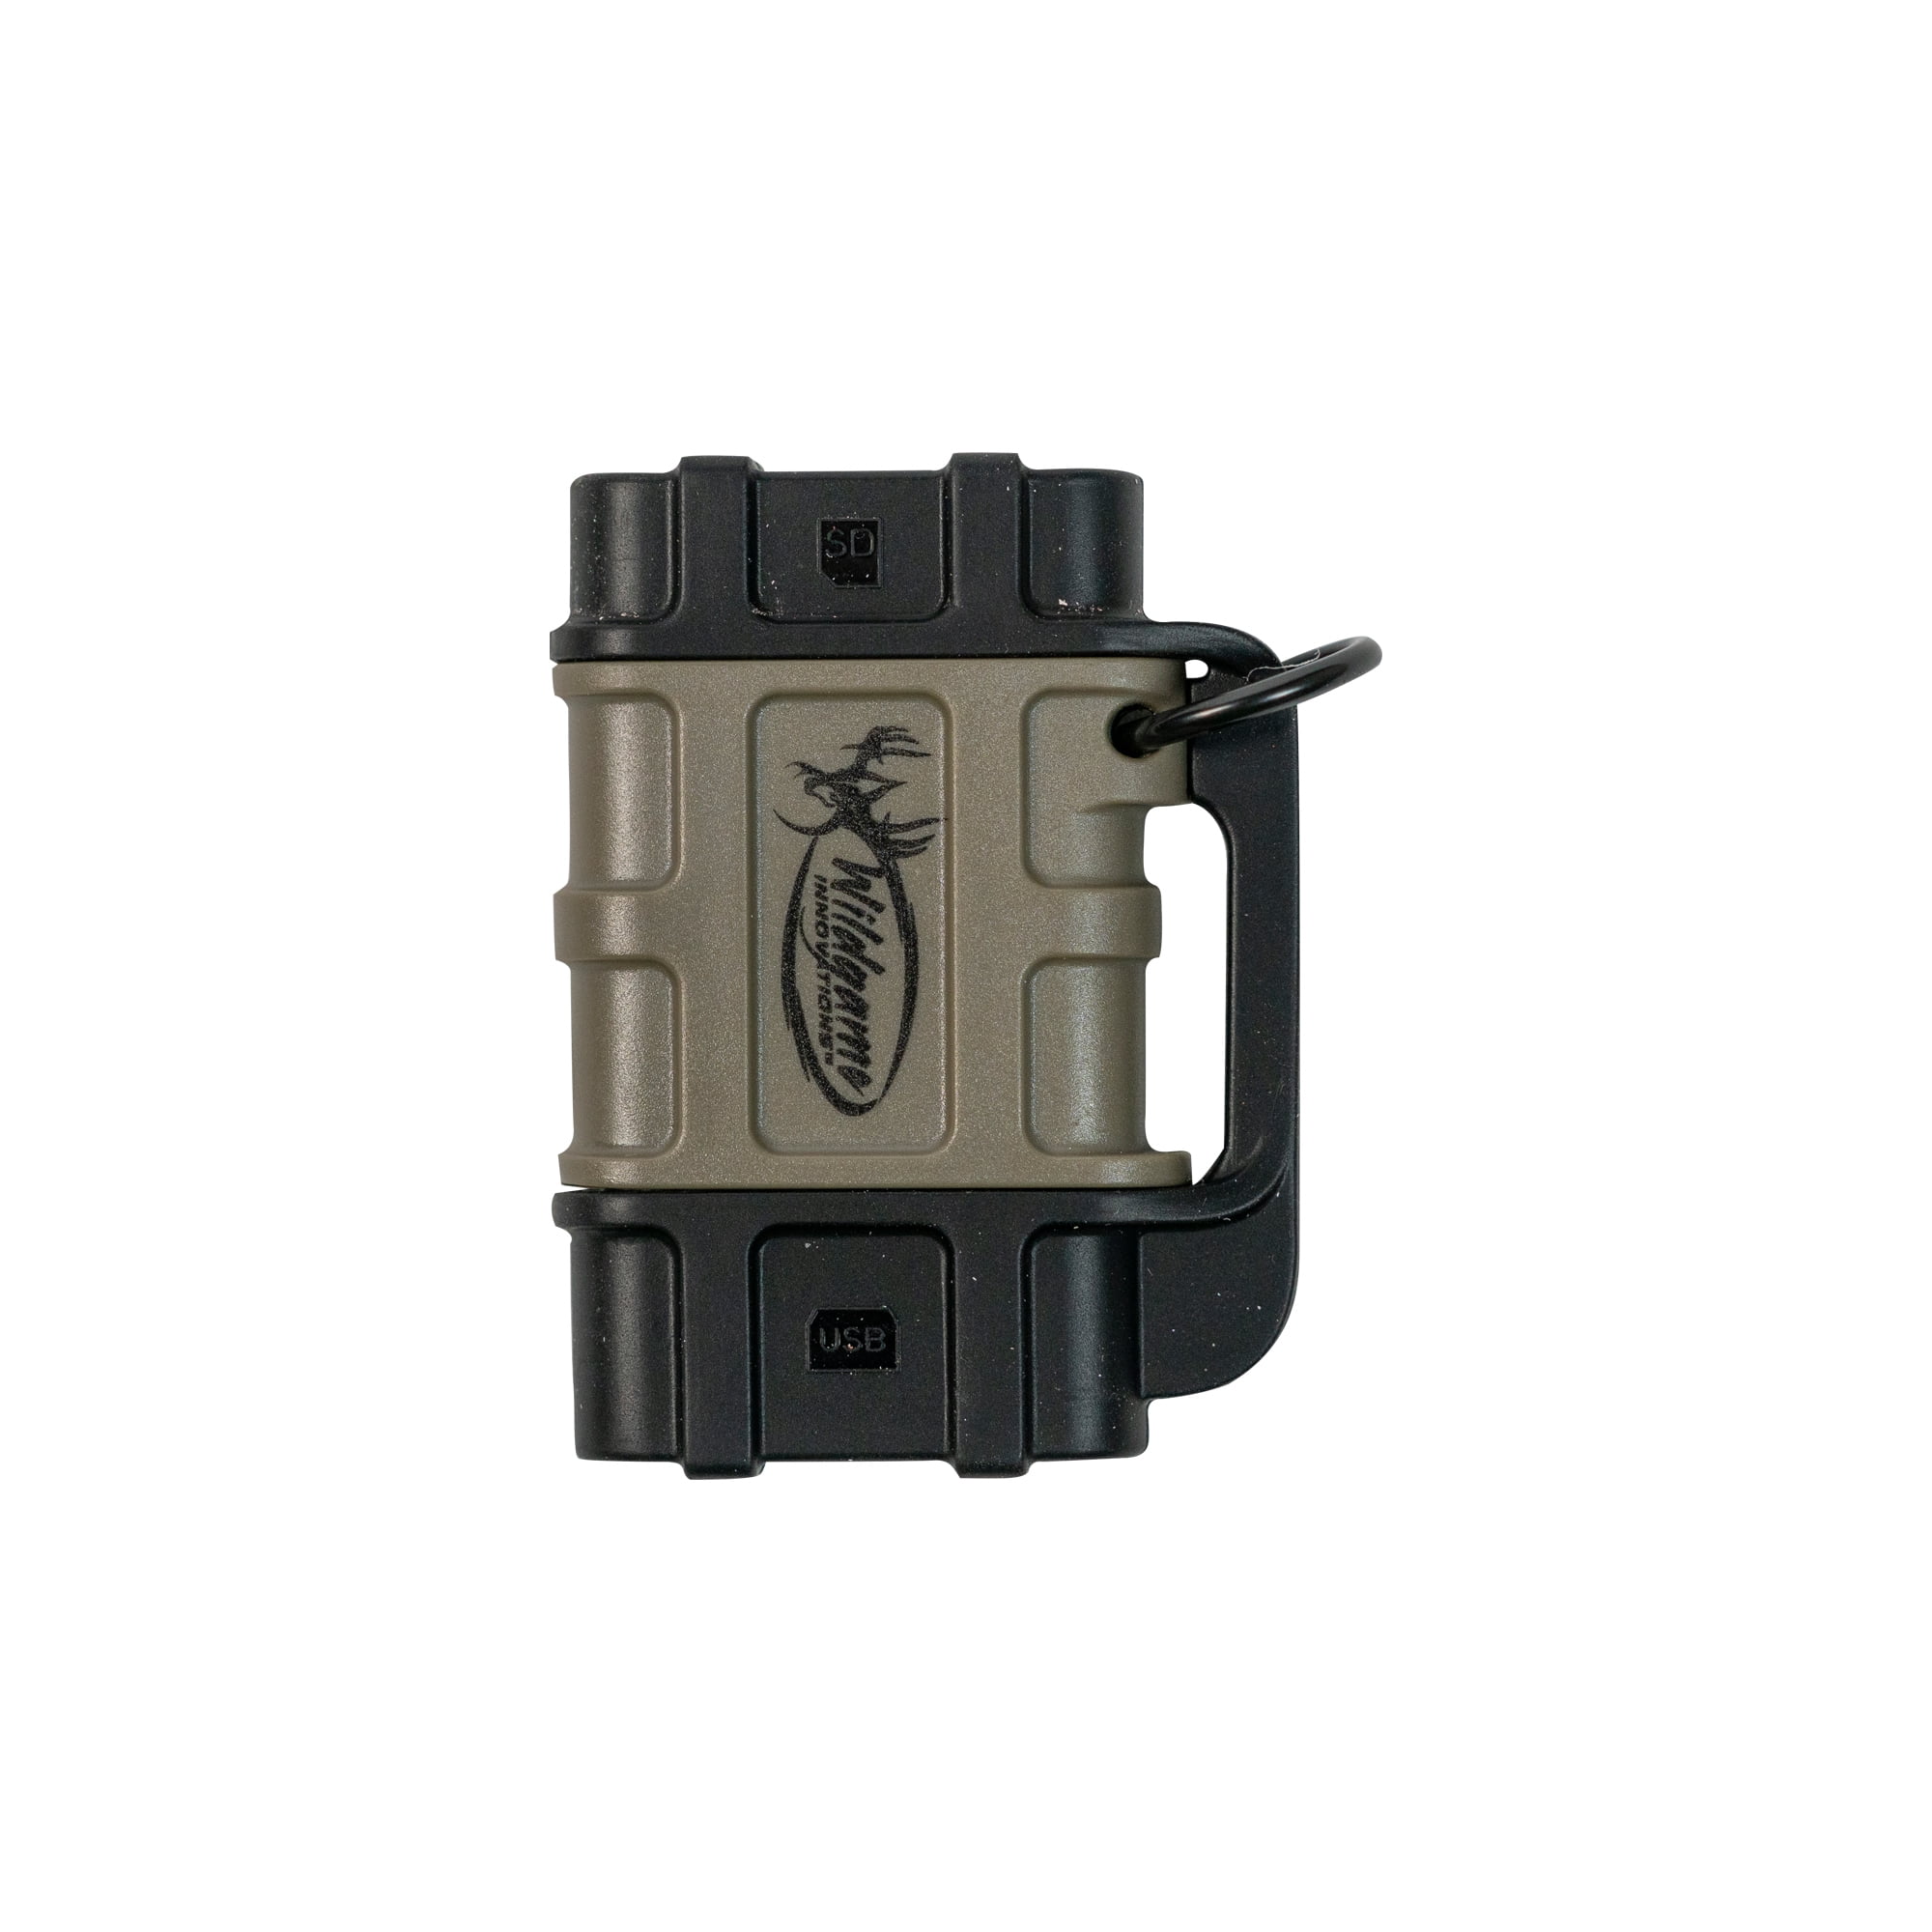 Wildgame Innovations SD Card Holder 358215 Holds 8 Cards for sale online 